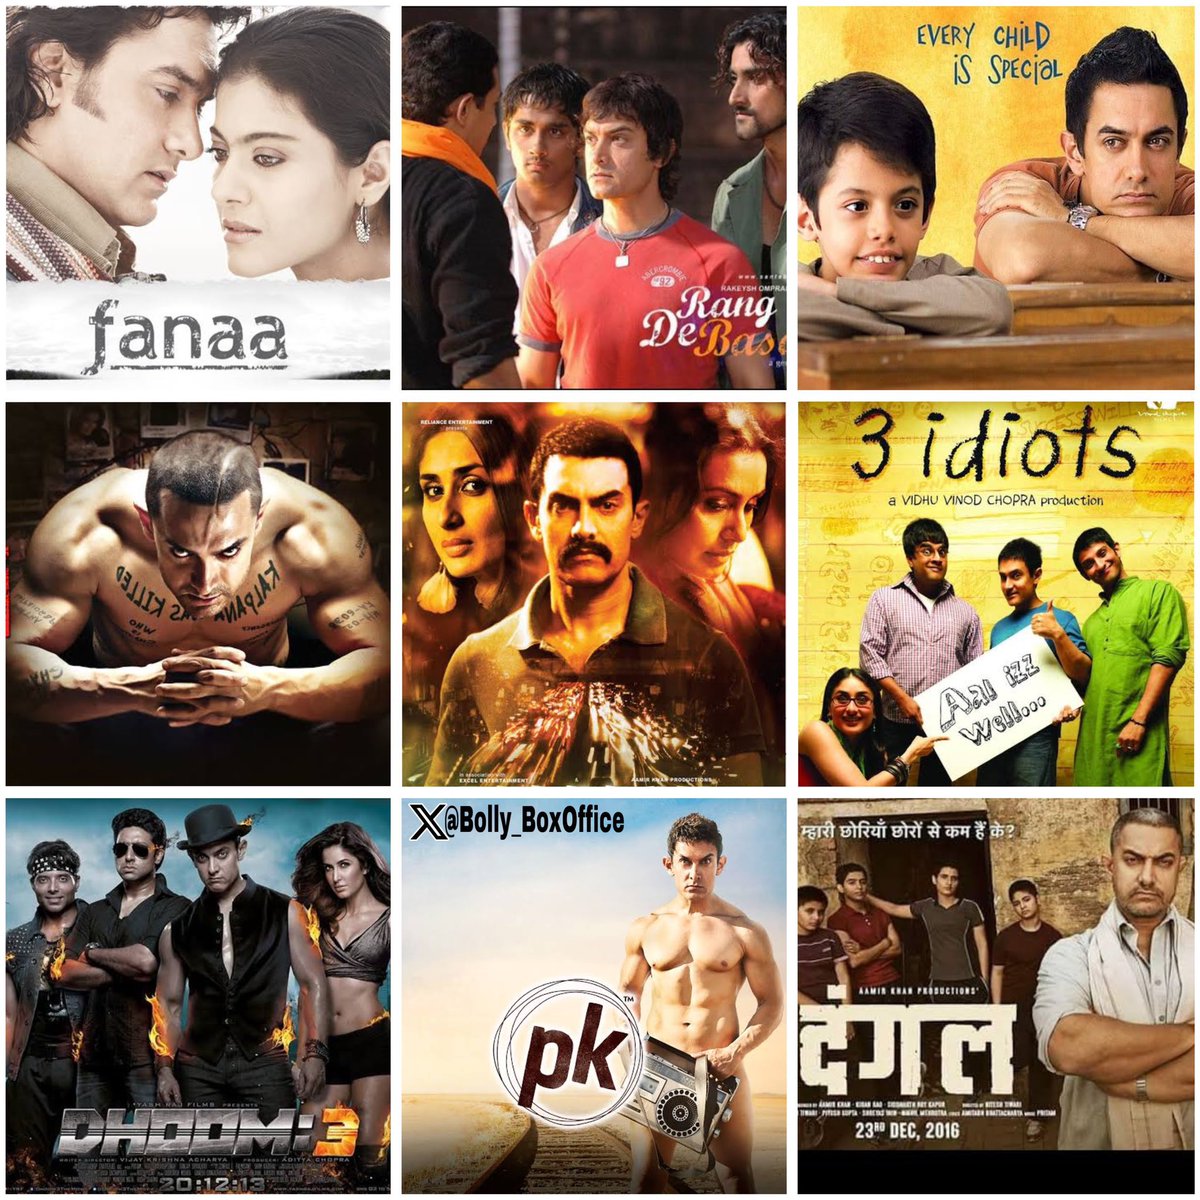 #AamirKhan from 2006 to 2016. Quality of movies 👌 as well as record breaking box office numbers 🔥🔥🔥

What an epic filmography 🙏🏻